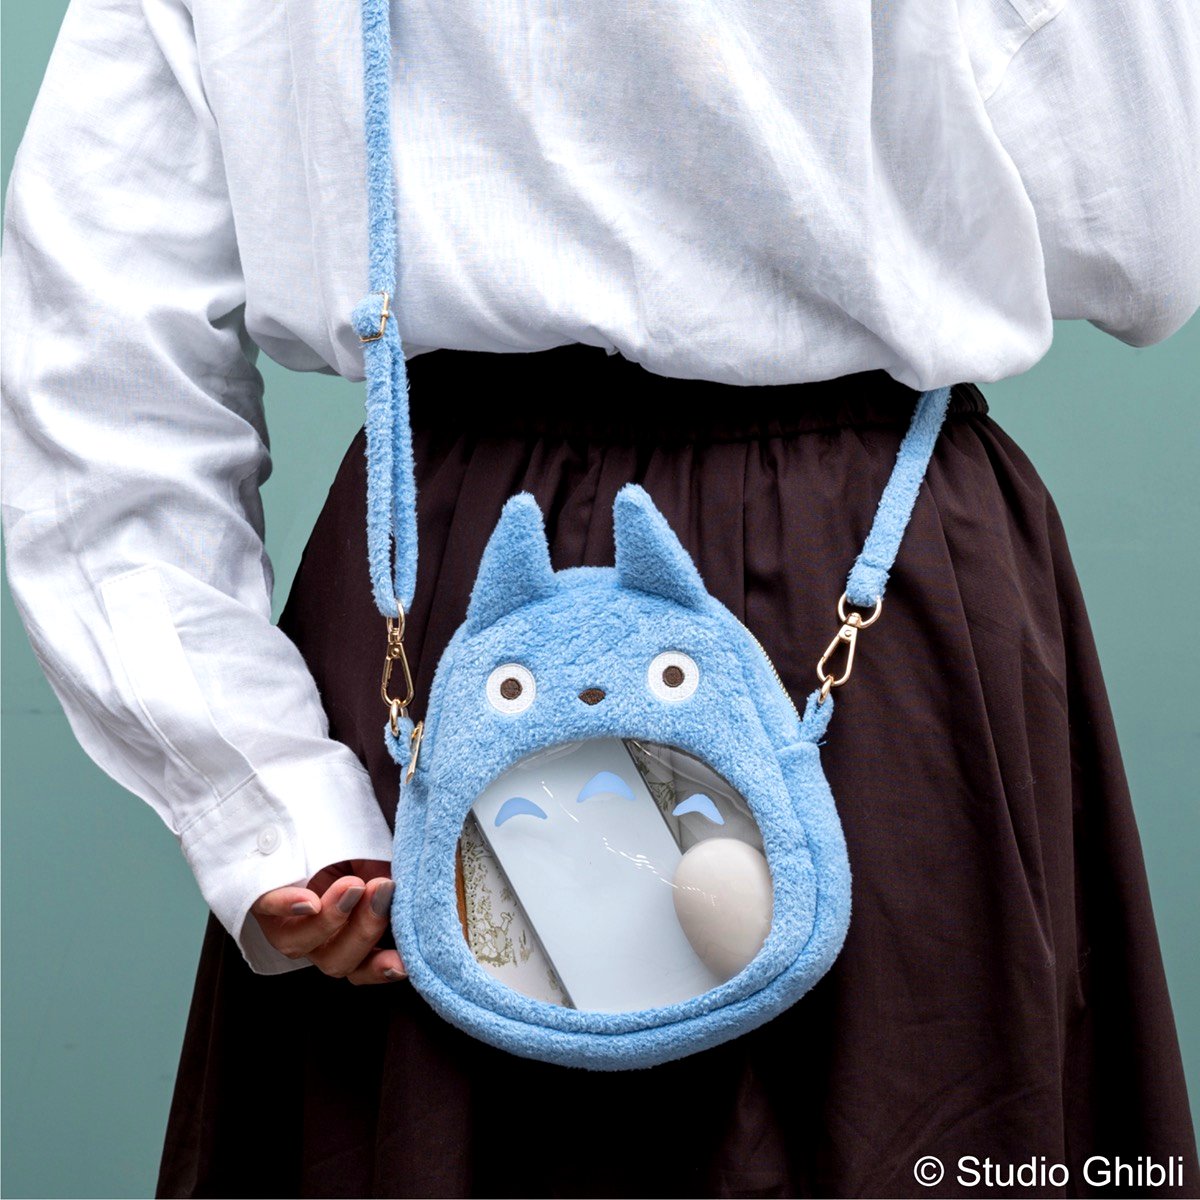 Studio Ghibli releases adorable bags, fans featuring characters from 4 ...